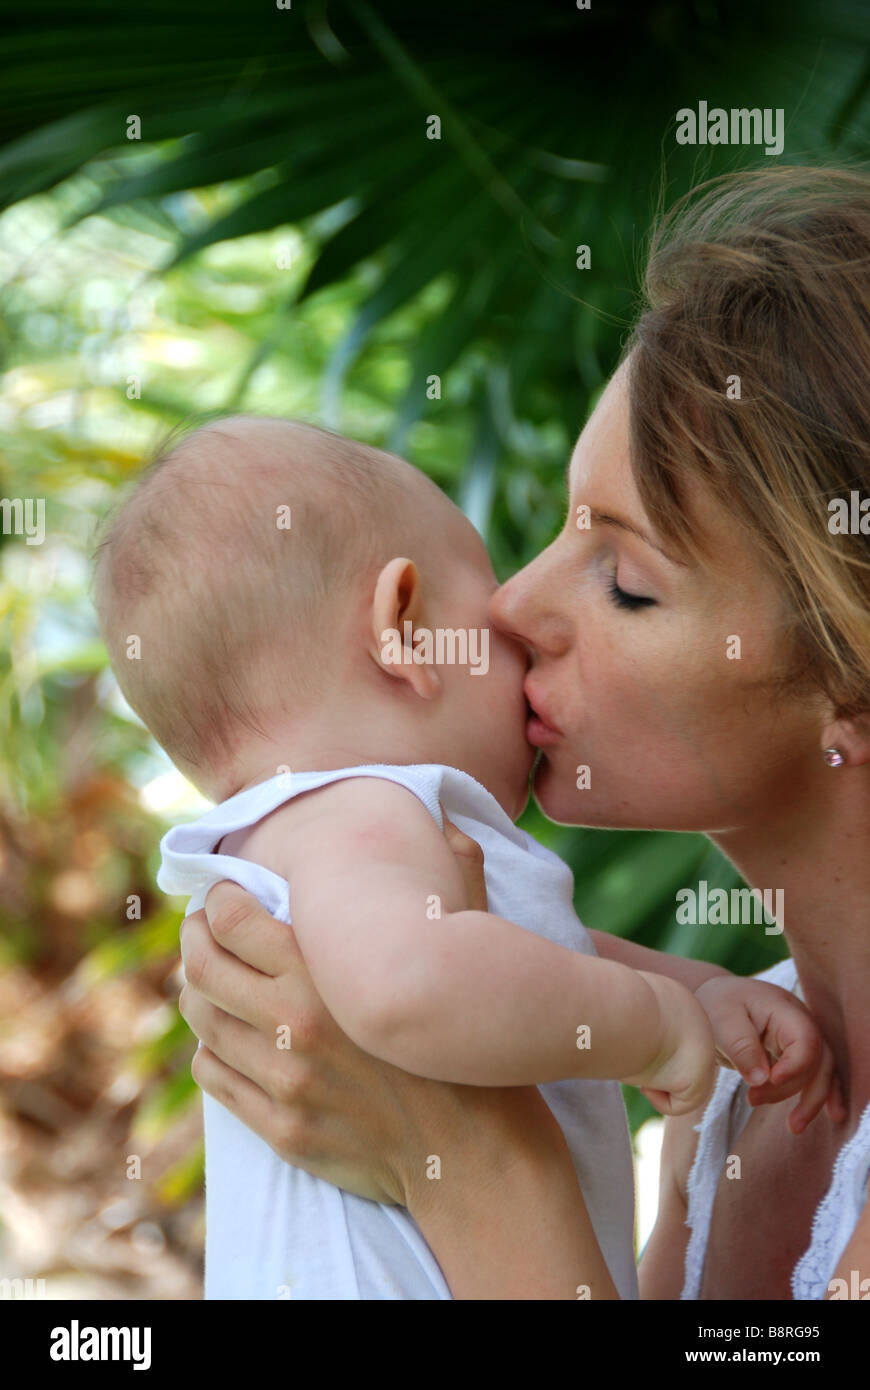 Young mother kissing young baby Stock Photo